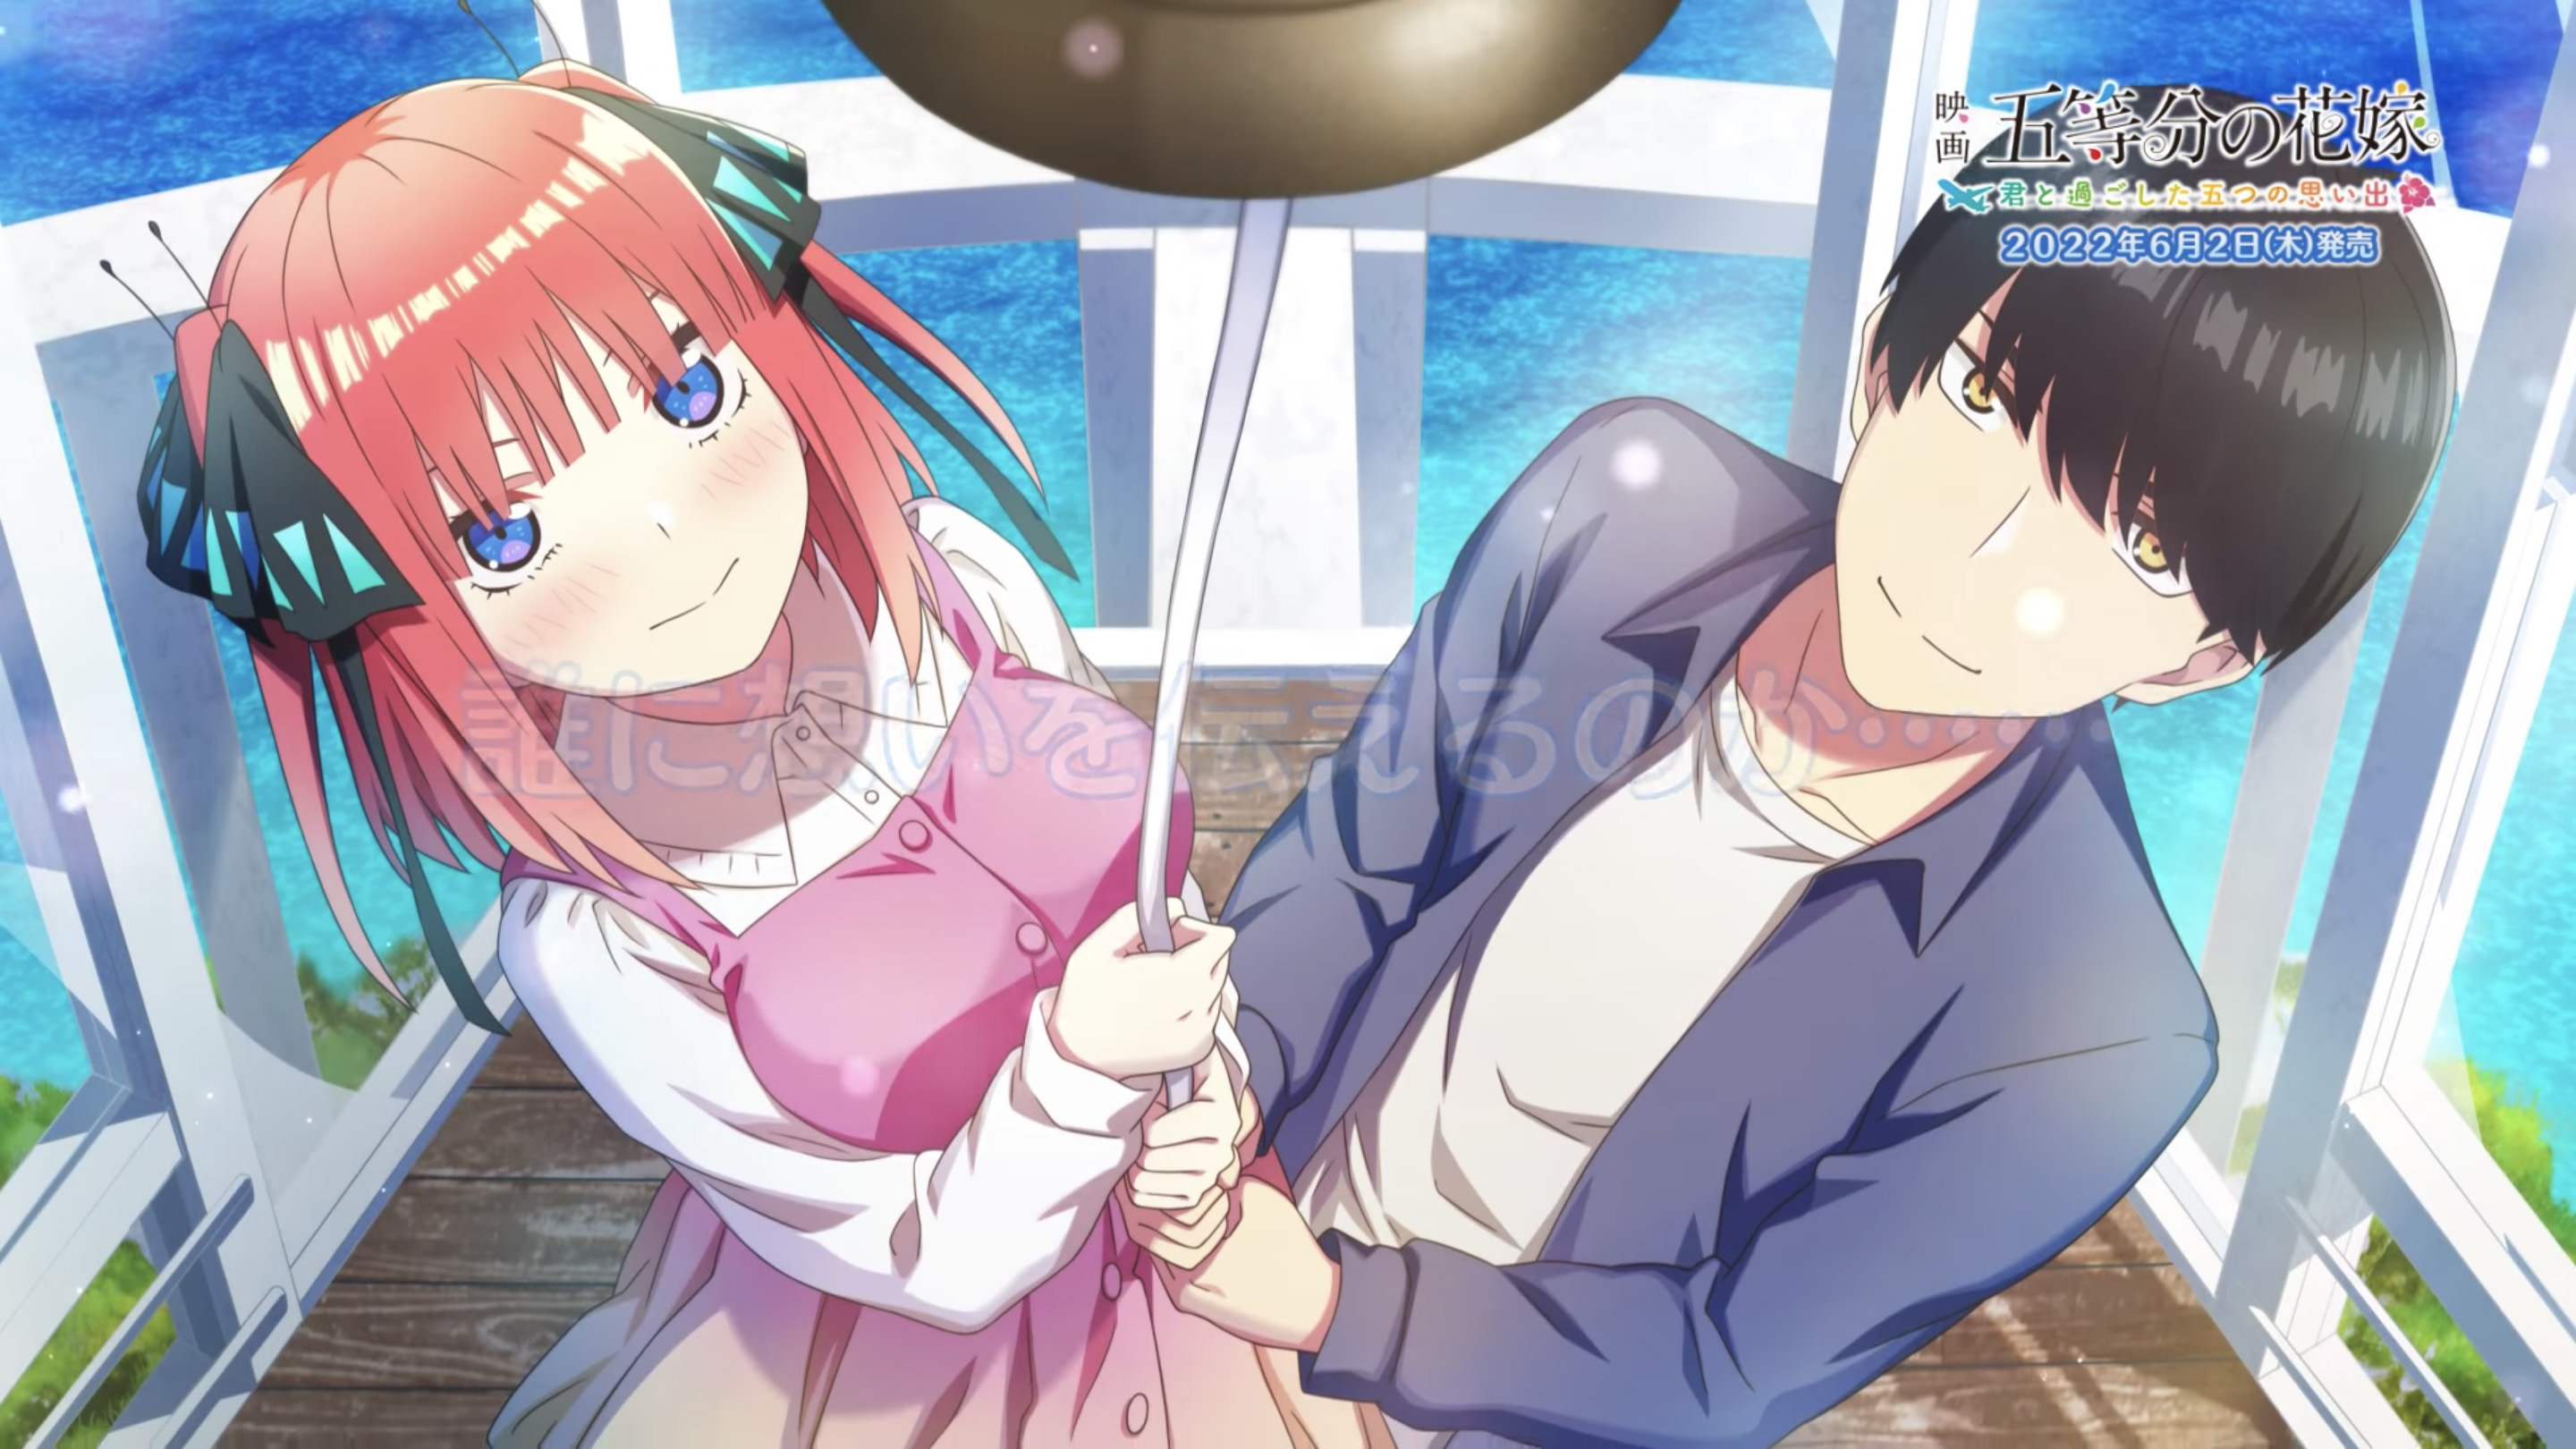 The Quintessential Quintuplets The Movie ~ Five Memories of the Time I Spent With You ~